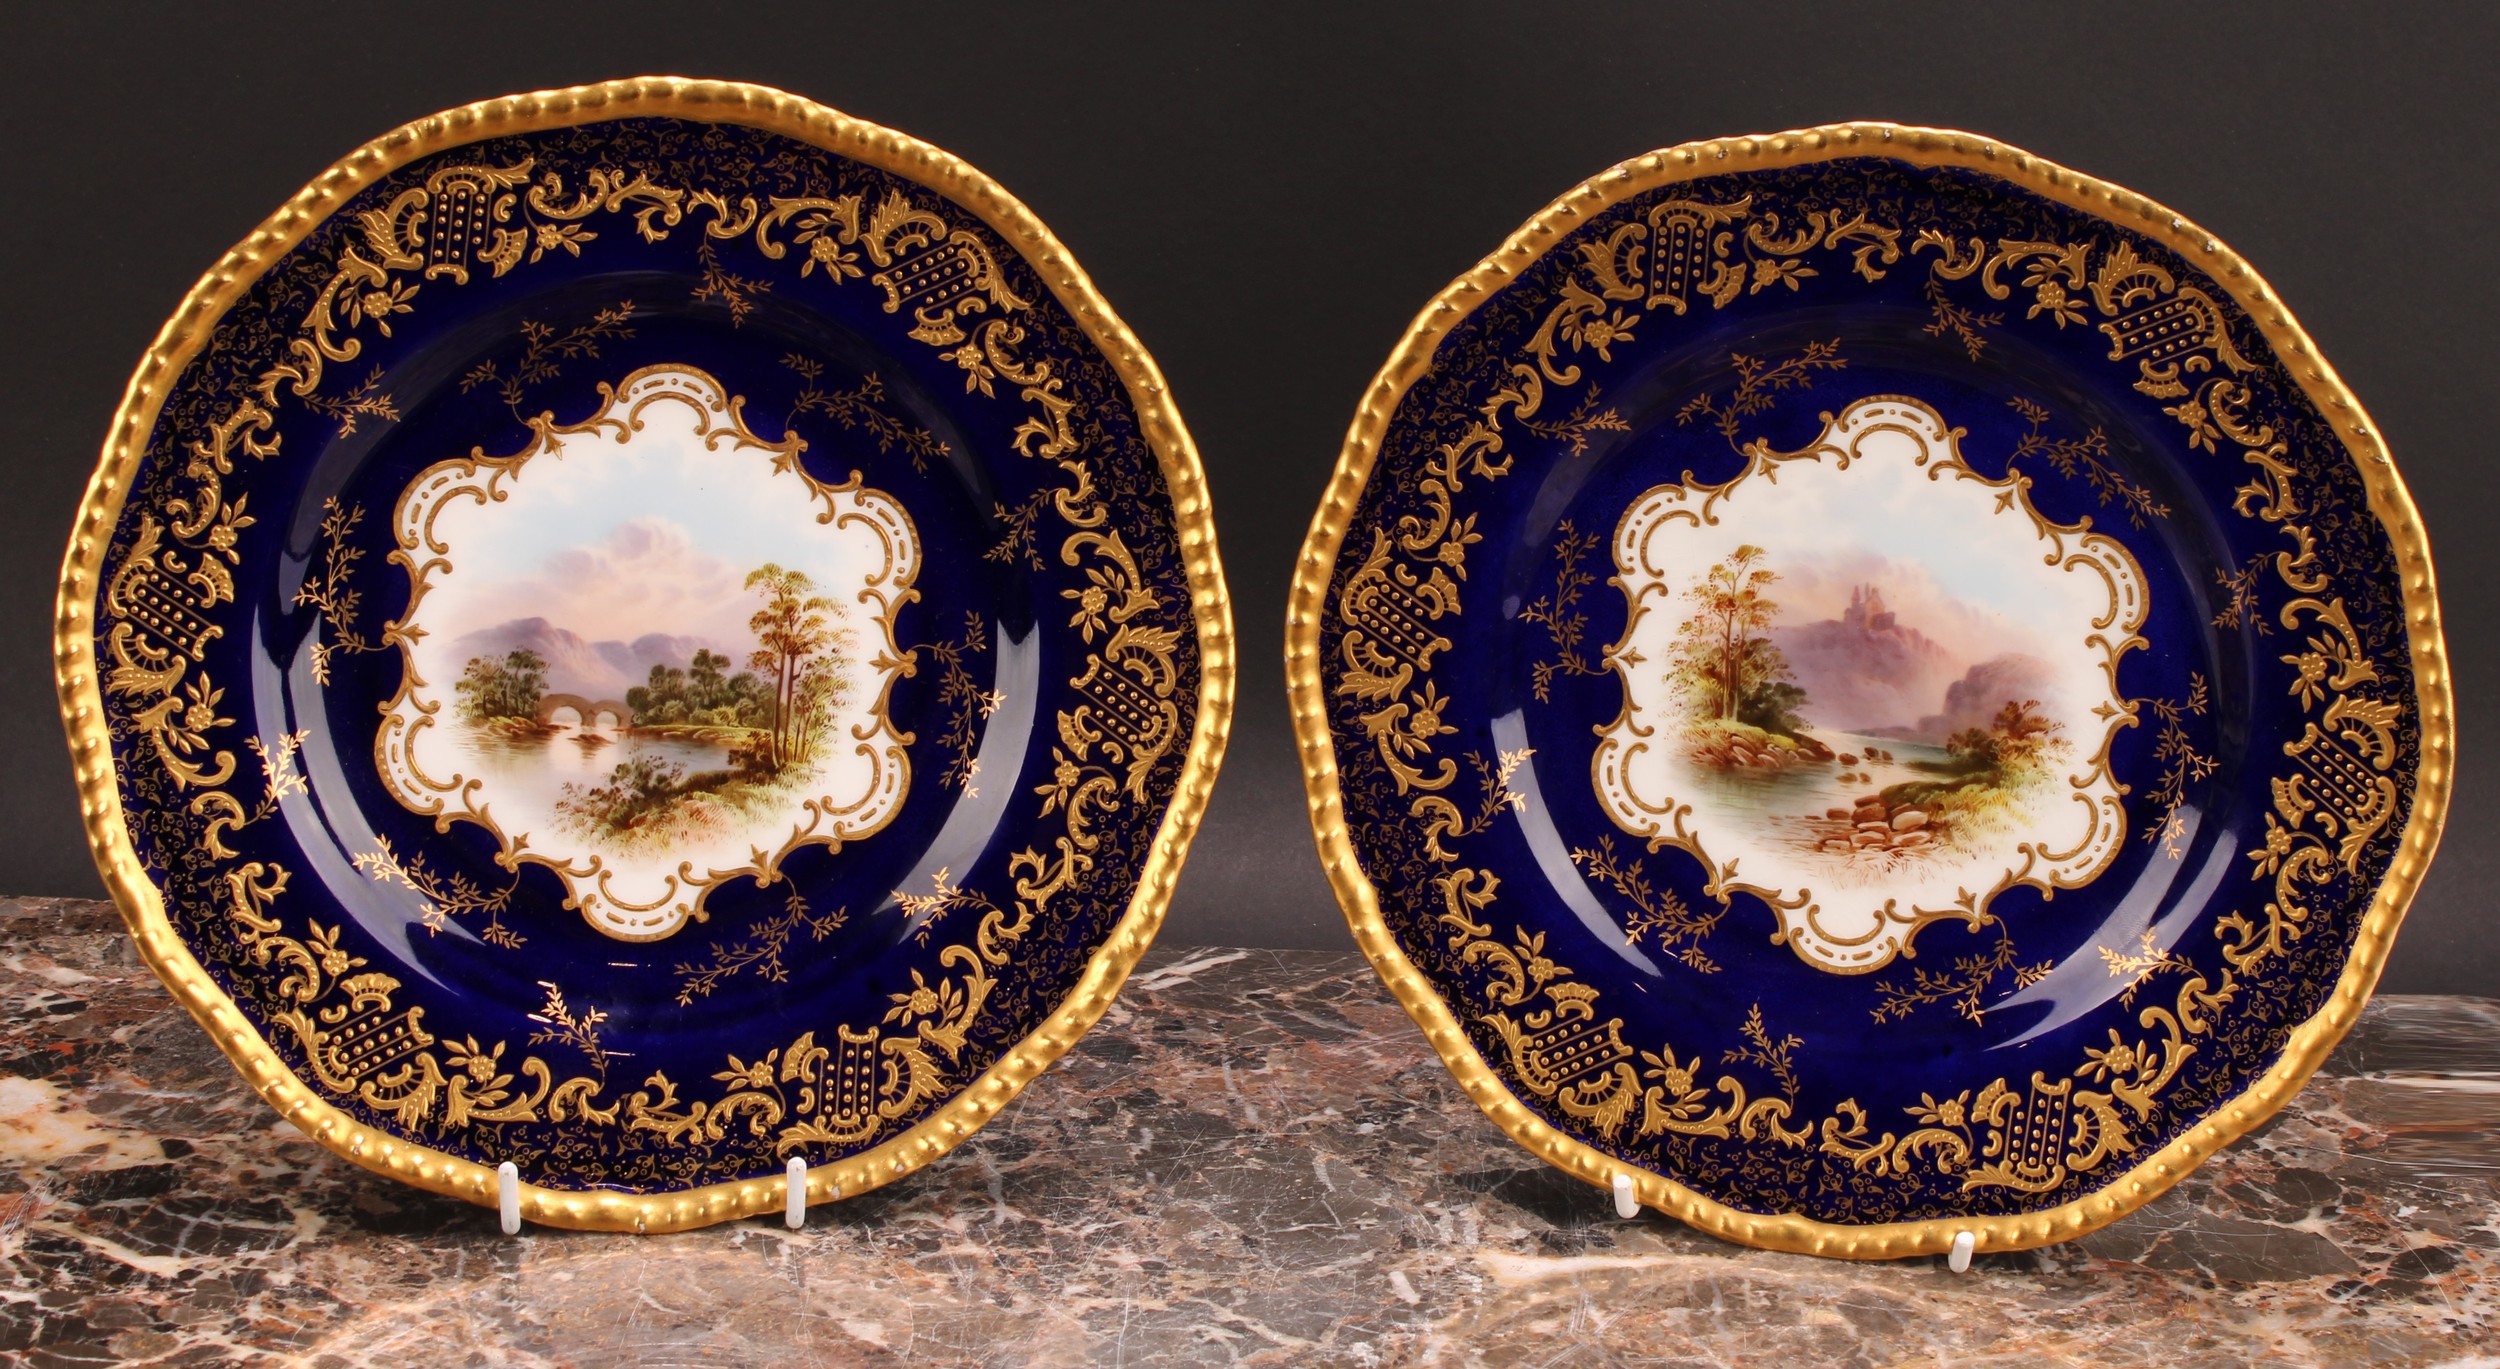 A pair of Coalport Named View shaped circular plates, Weir Bridge and 'Thornden', each painted